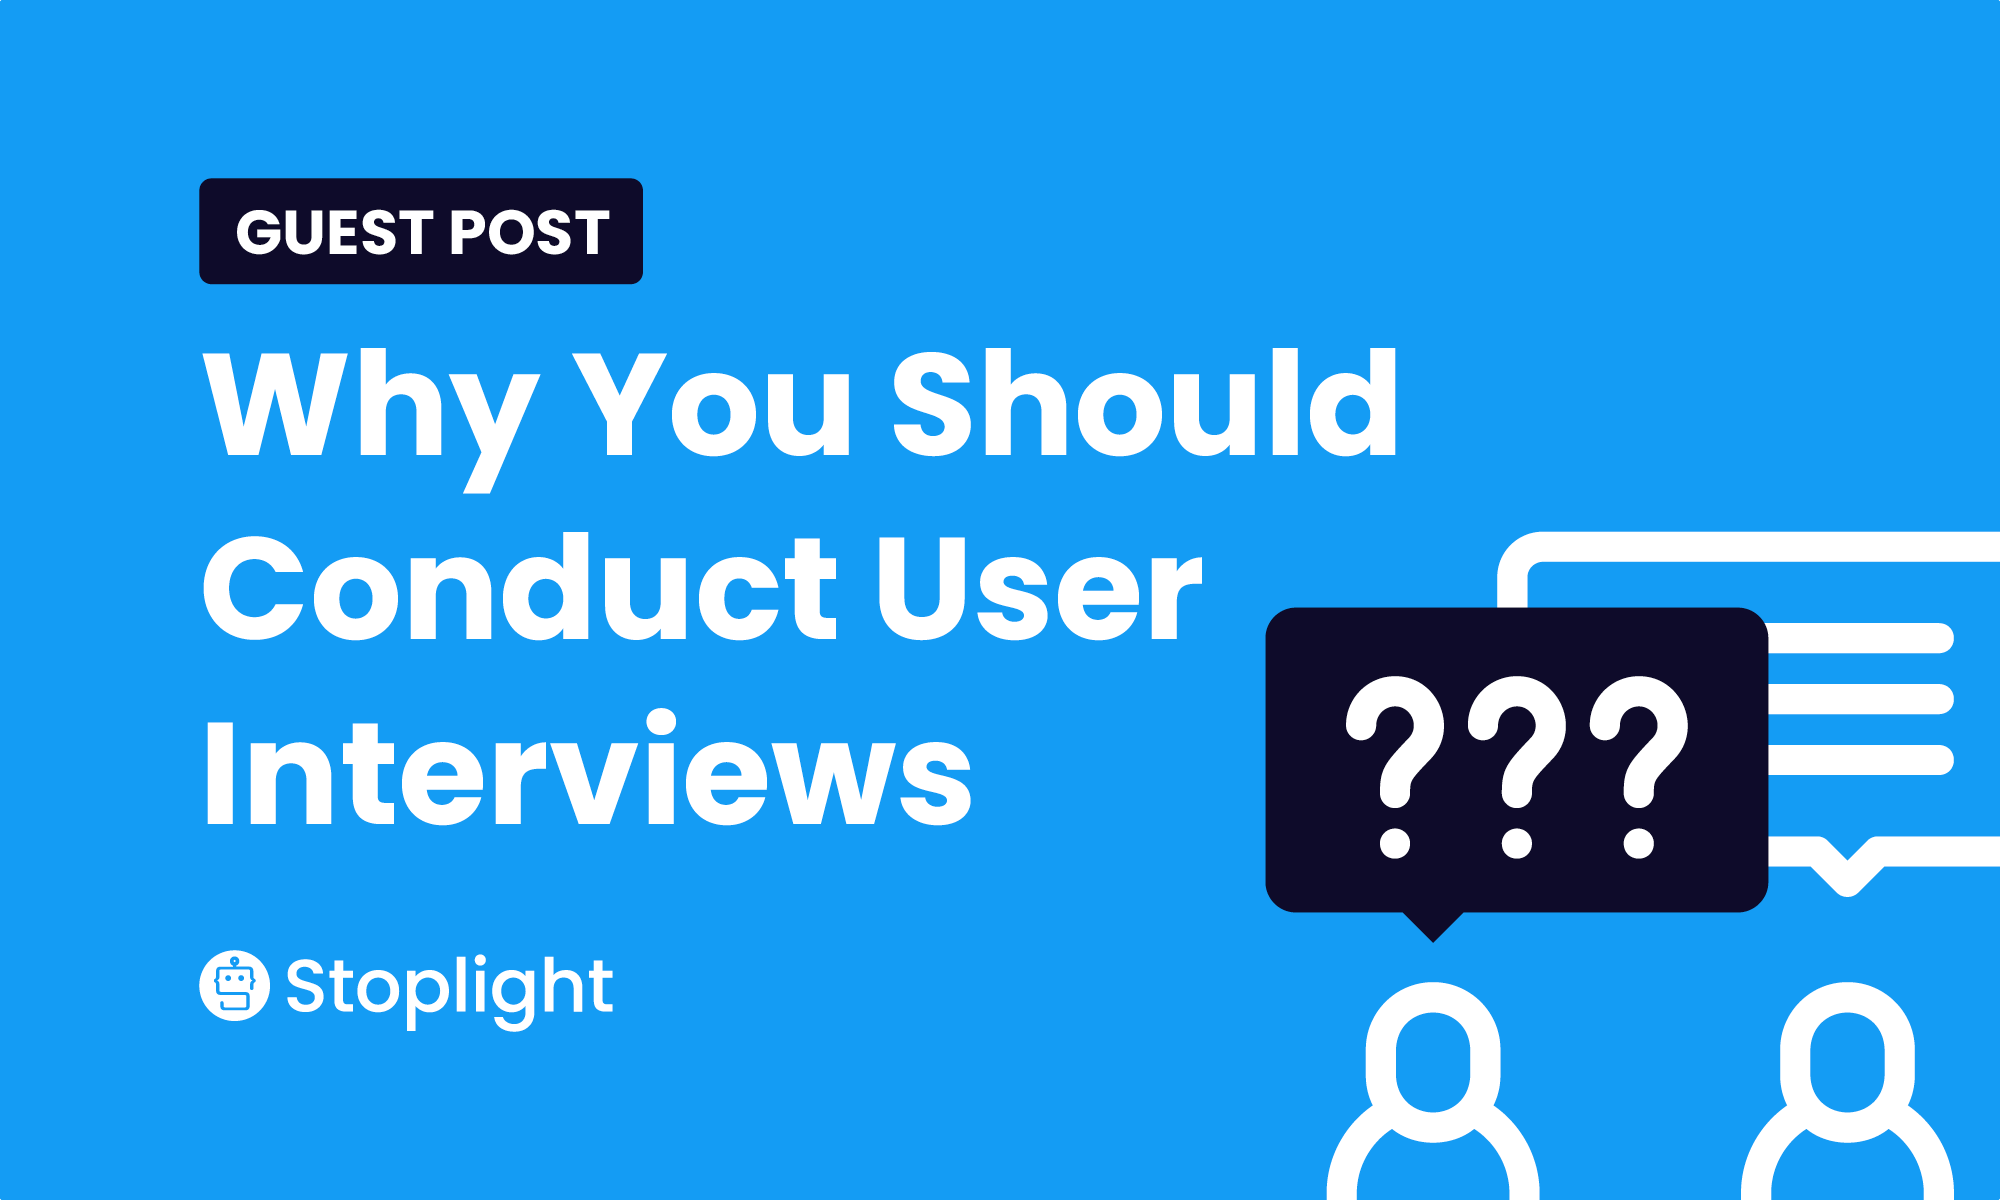 Developer Insights: Why You Should Conduct User Interviews